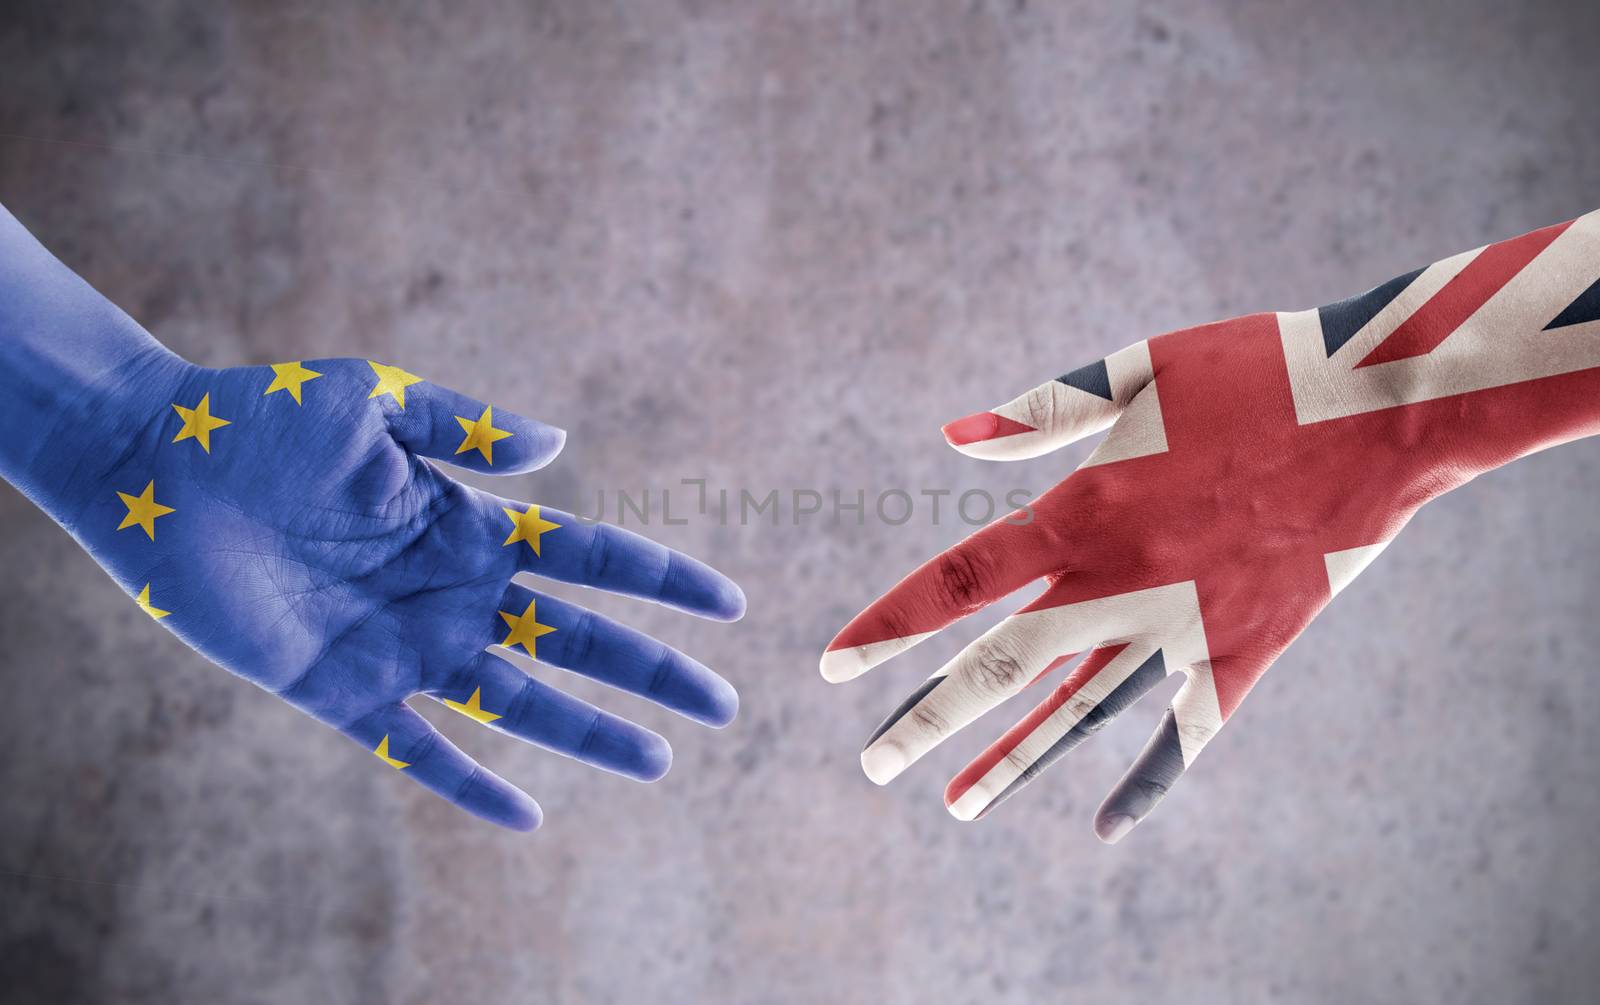 Hands painted with UK and European flag reaching out for a handshake